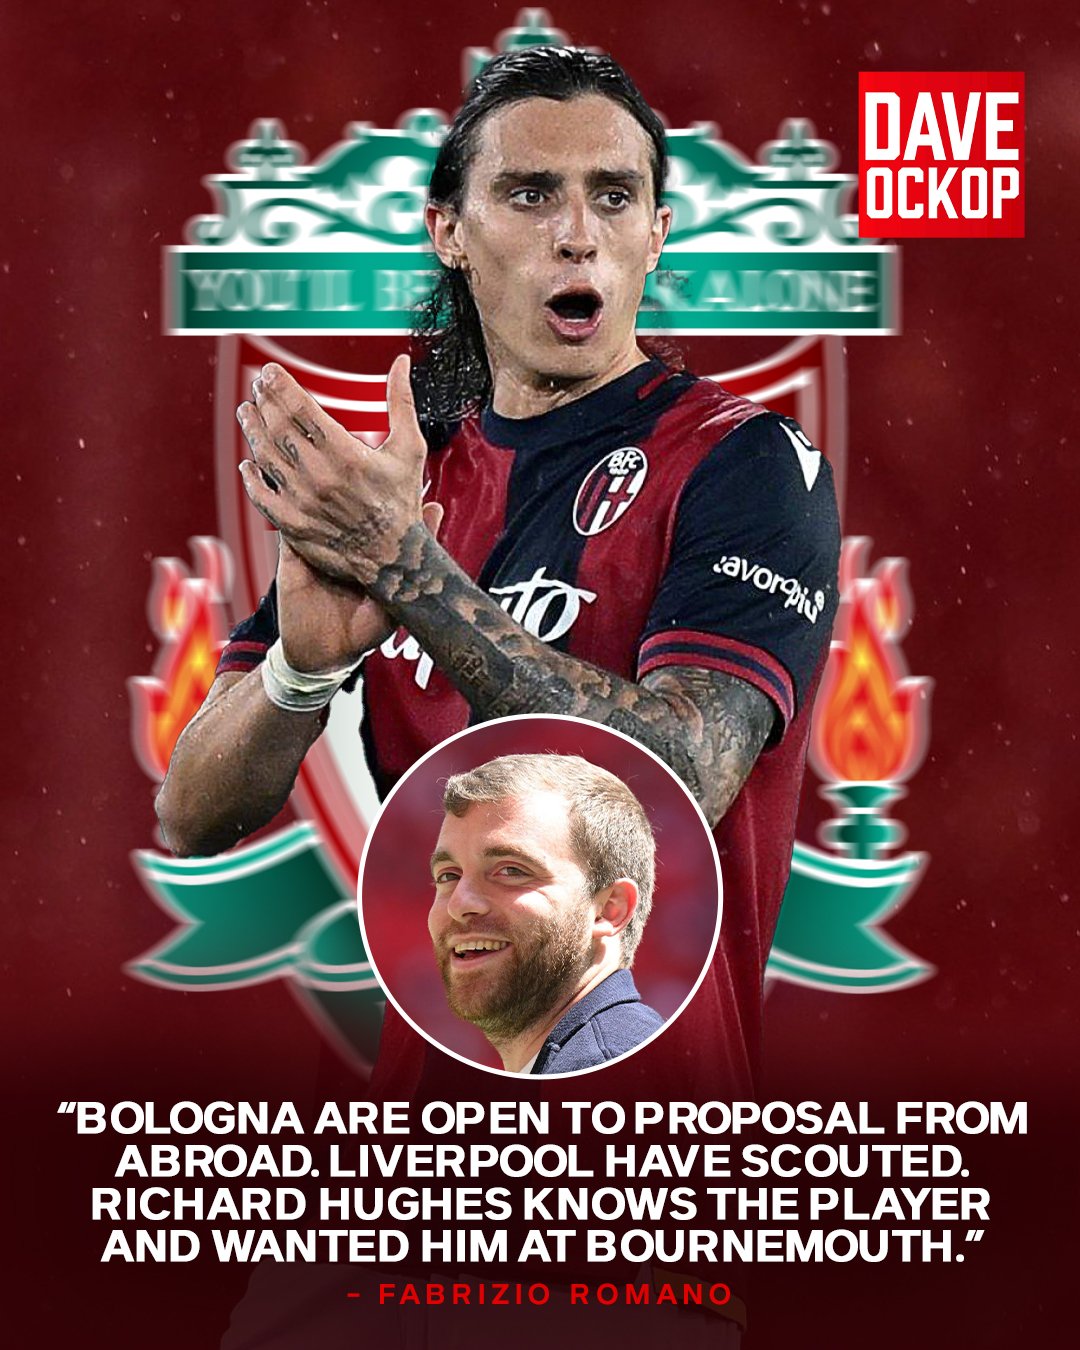 DaveOCKOP on X: "Fabrizio Romano on Riccardo Calafiori: “Bologna are open  to proposal from abroad. Liverpool have scouted. Richard Hughes knows the  player and wanted him at Bournemouth.” https://t.co/dDY86Fjoe5" / X